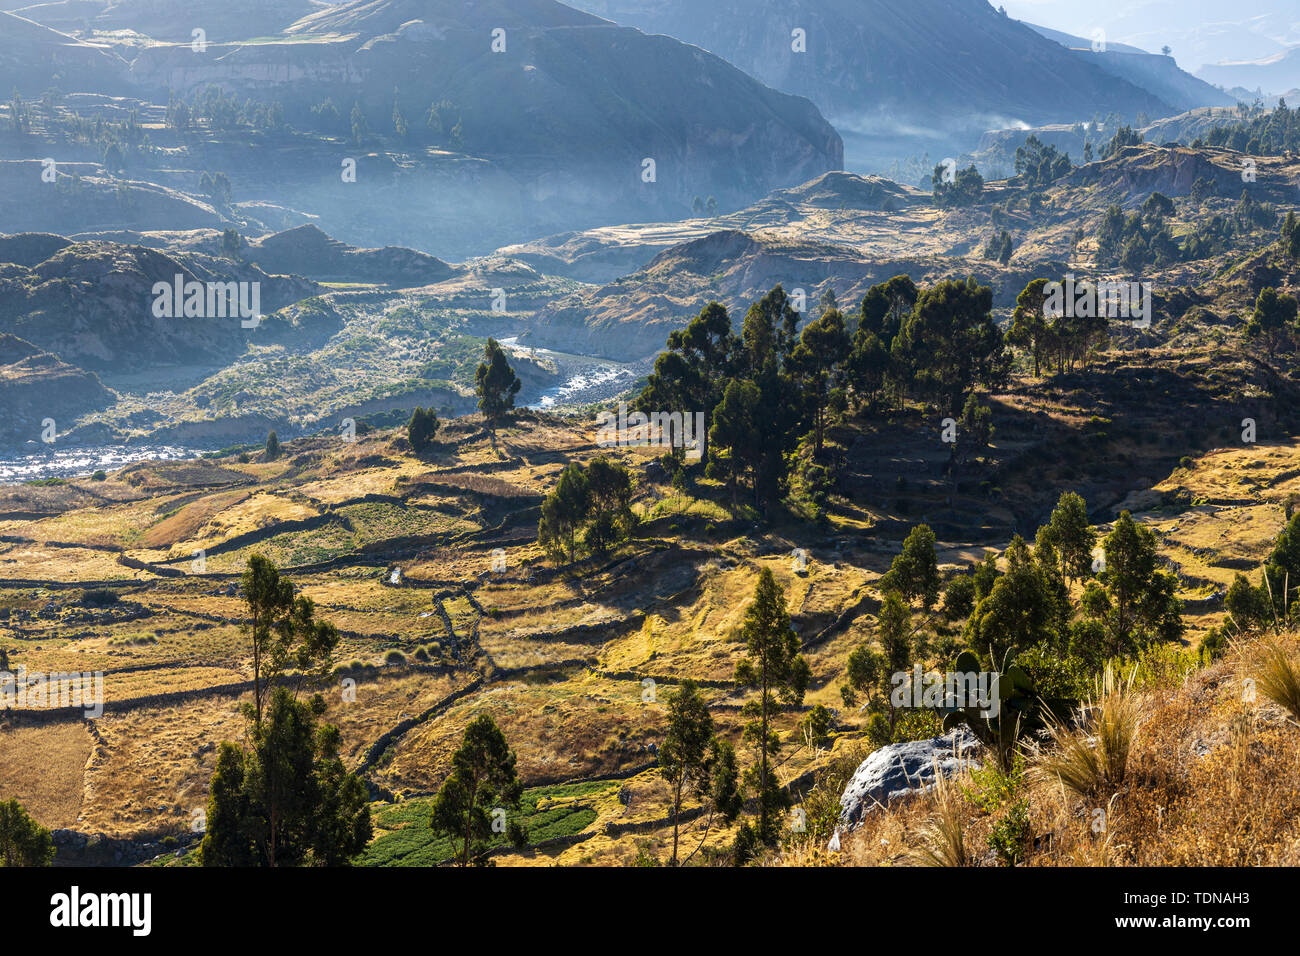 Agricultural terraces in the Colca Canyon, valley viewed from the Mirador Antahuilque, Peru, South America. Stock Photo